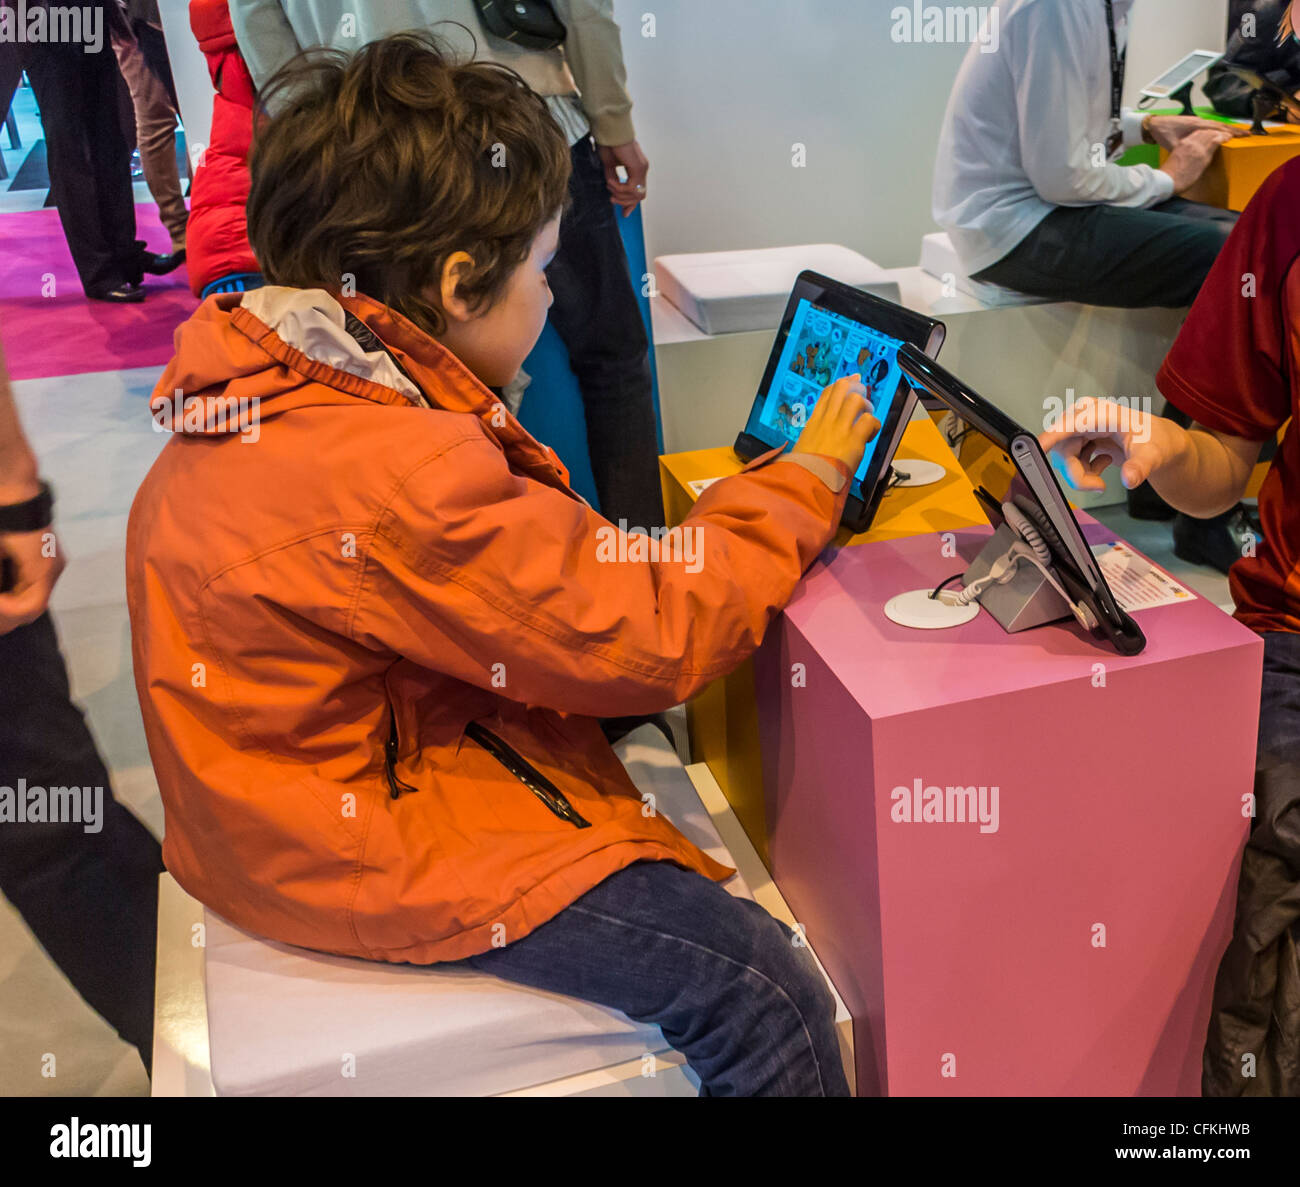 Paris, France, People using new exciting technology. Salon du Livre, Book Fair, Sony Tablets, publishing business Stock Photo